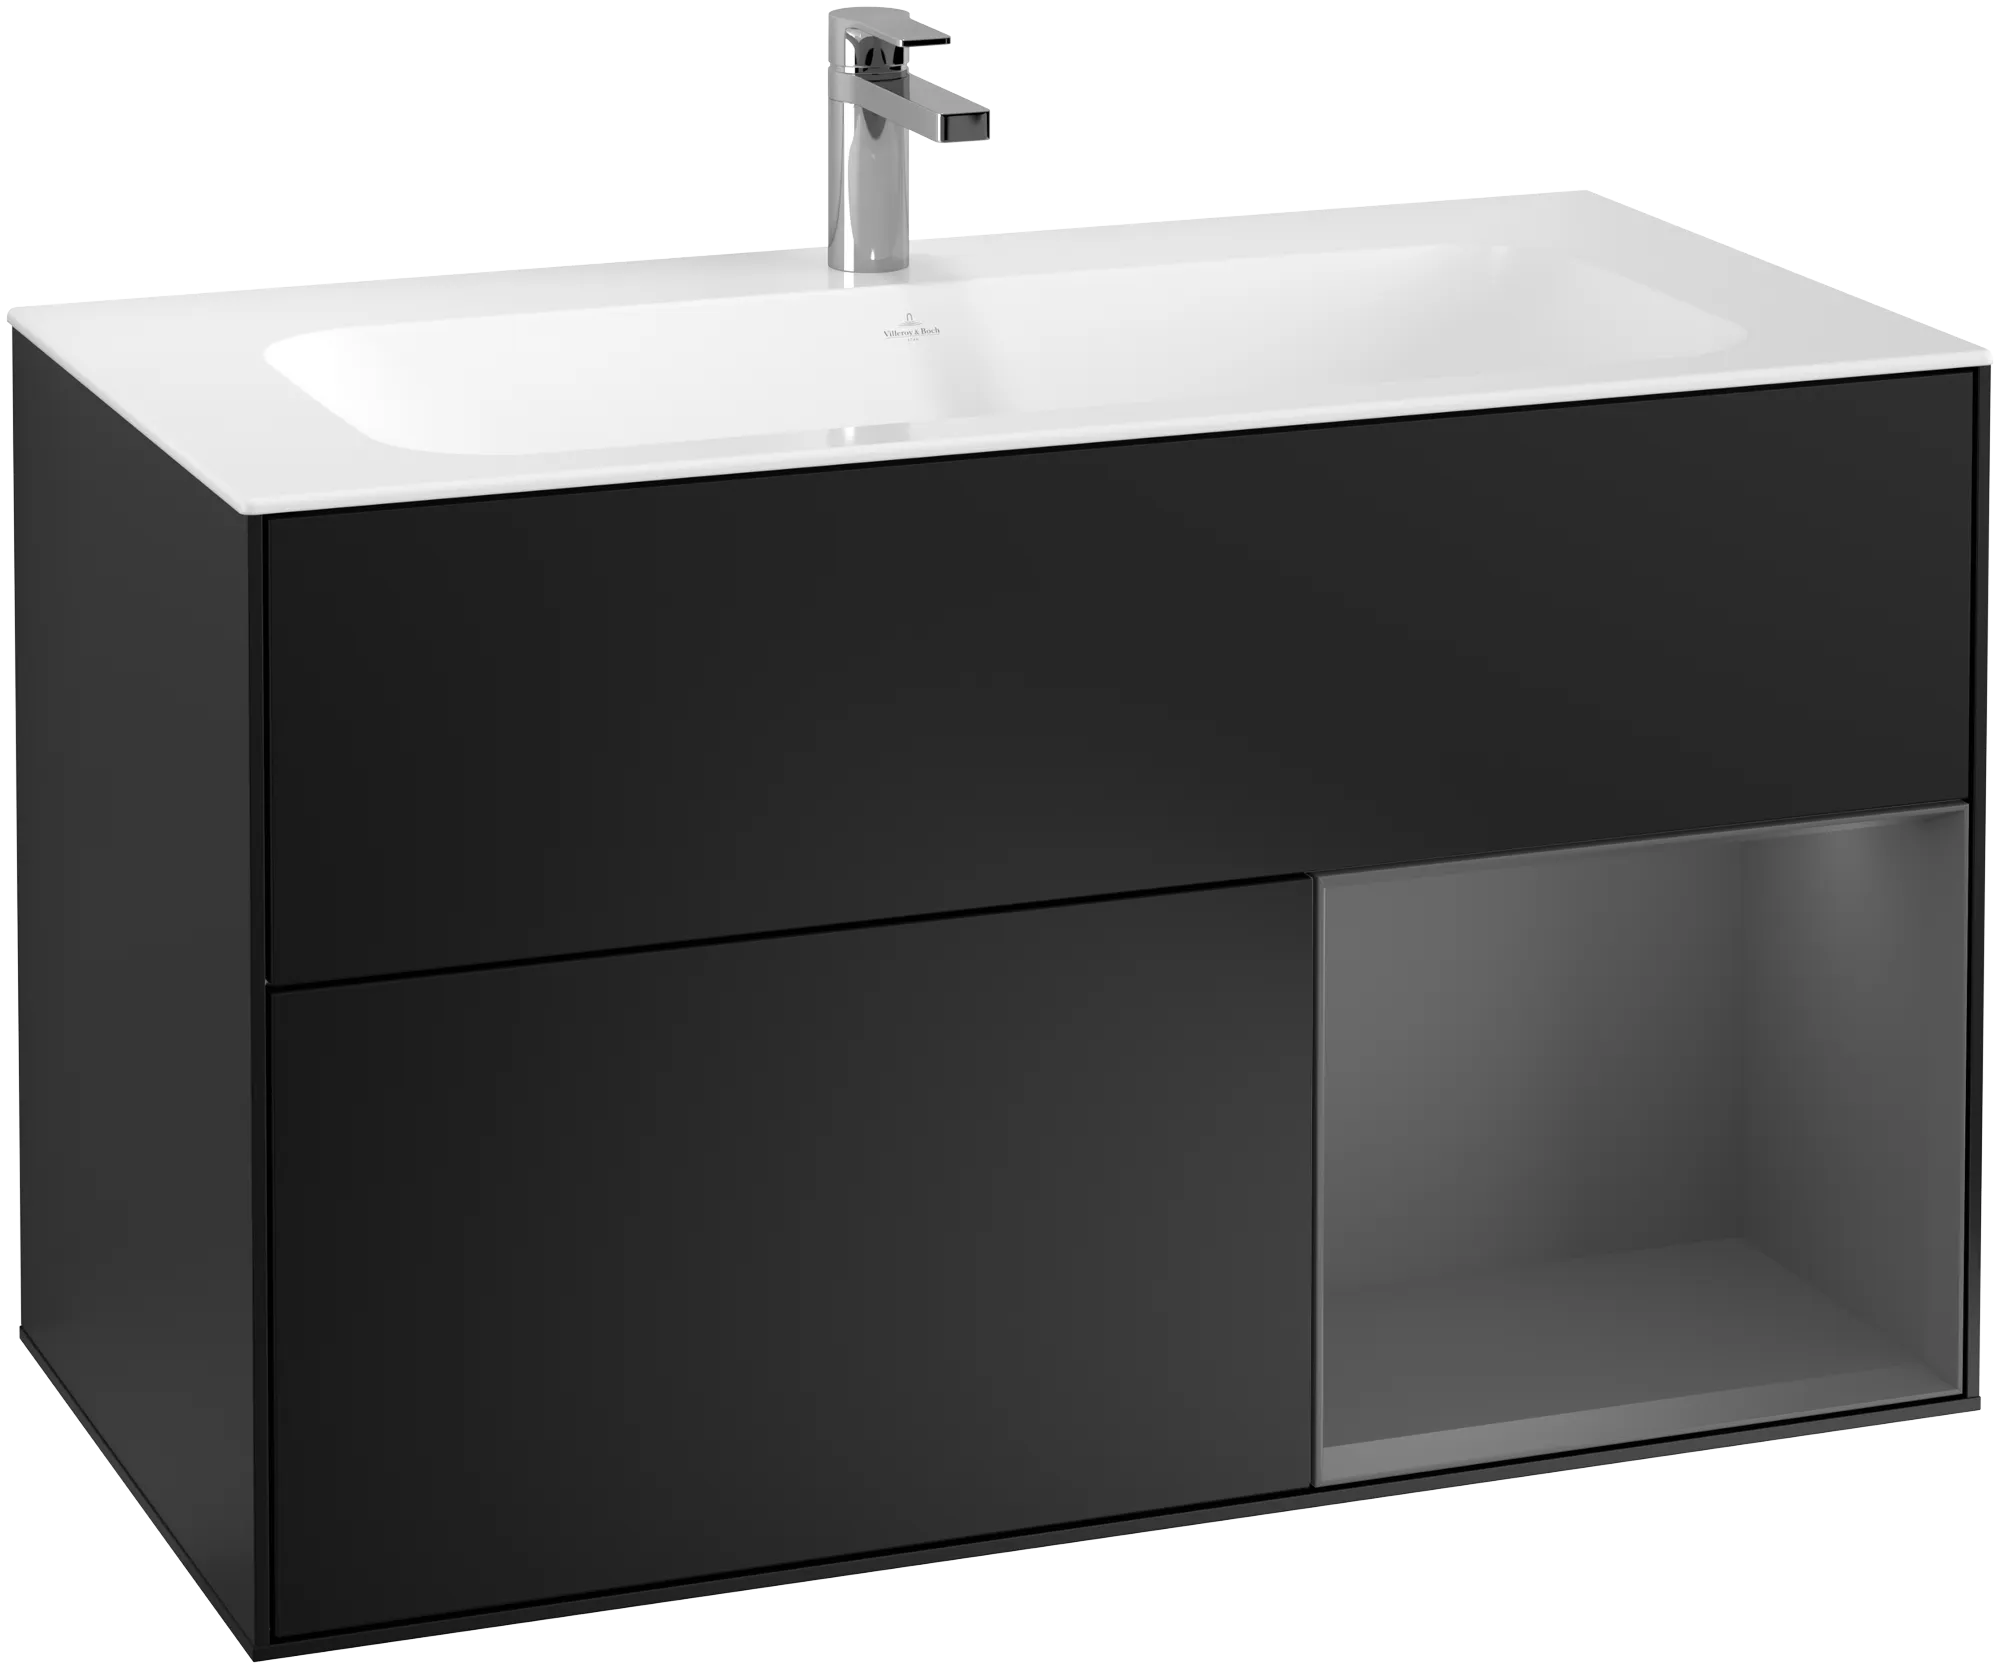 Picture of VILLEROY BOCH Finion Vanity unit, with lighting, 2 pull-out compartments, 996 x 591 x 498 mm, Black Matt Lacquer / Anthracite Matt Lacquer #G040GKPD